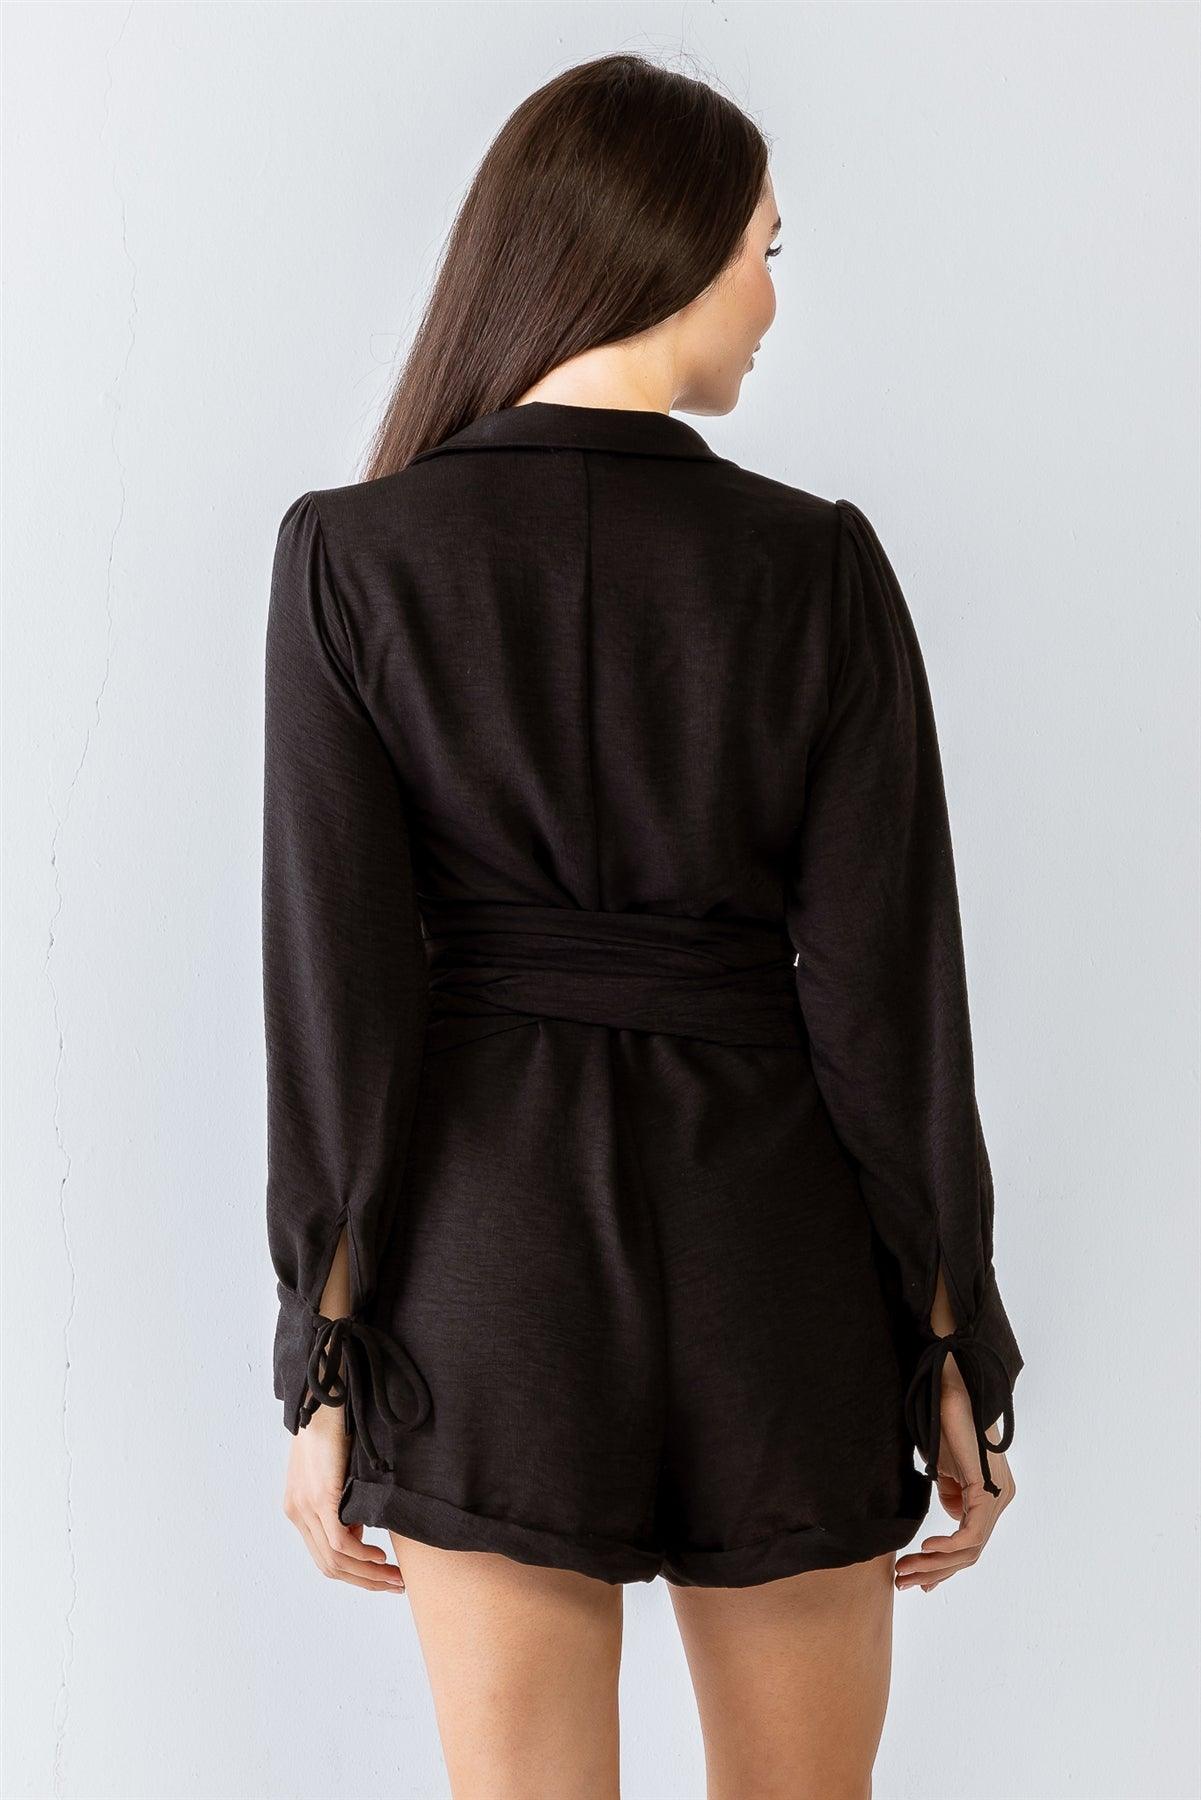 Black Textured Button-Up Collared Neck Long Sleeve Belted Romper /1-2-2-1